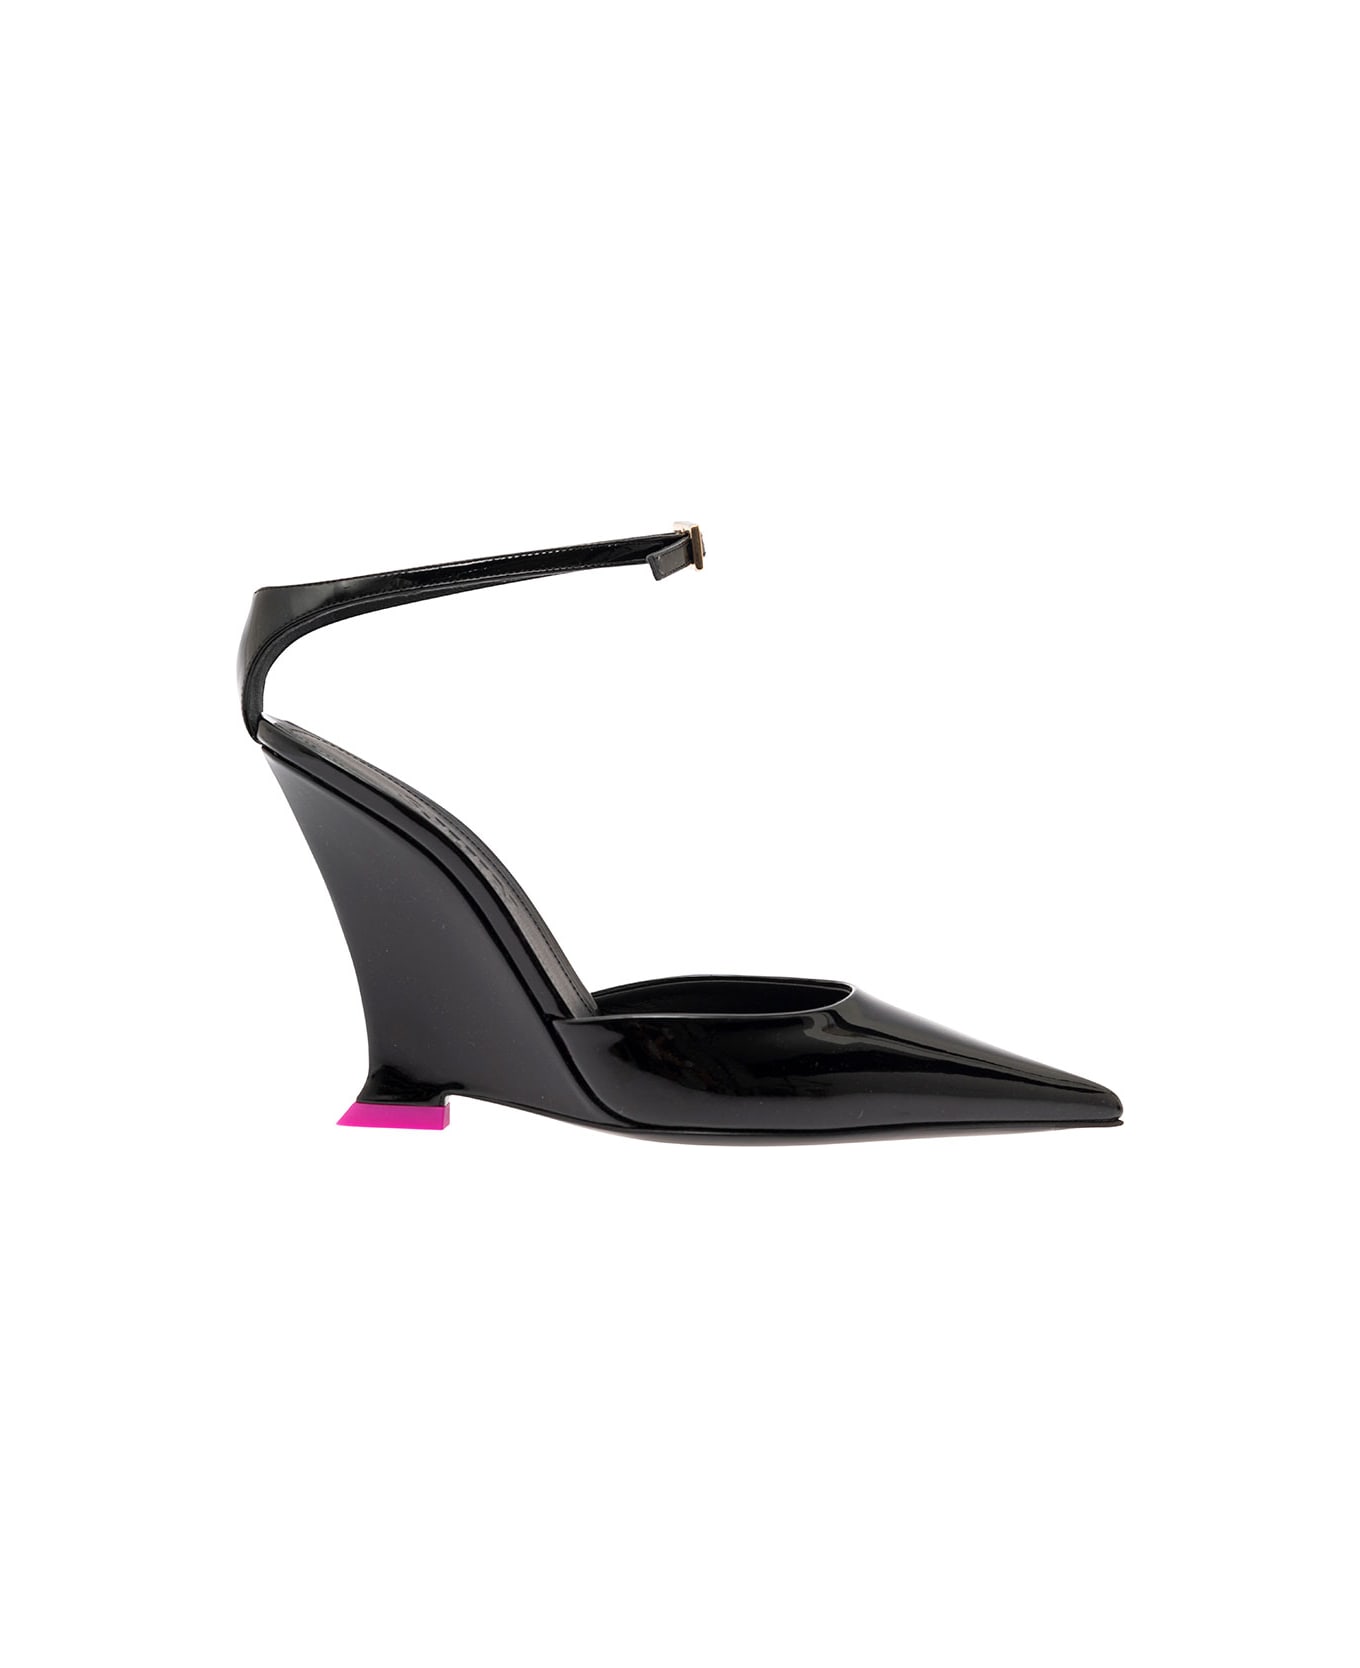 3JUIN 'clea' Black Pumps With Wedge Heel And Contrasting Detail In Leather Woman - Black ウェッジシューズ